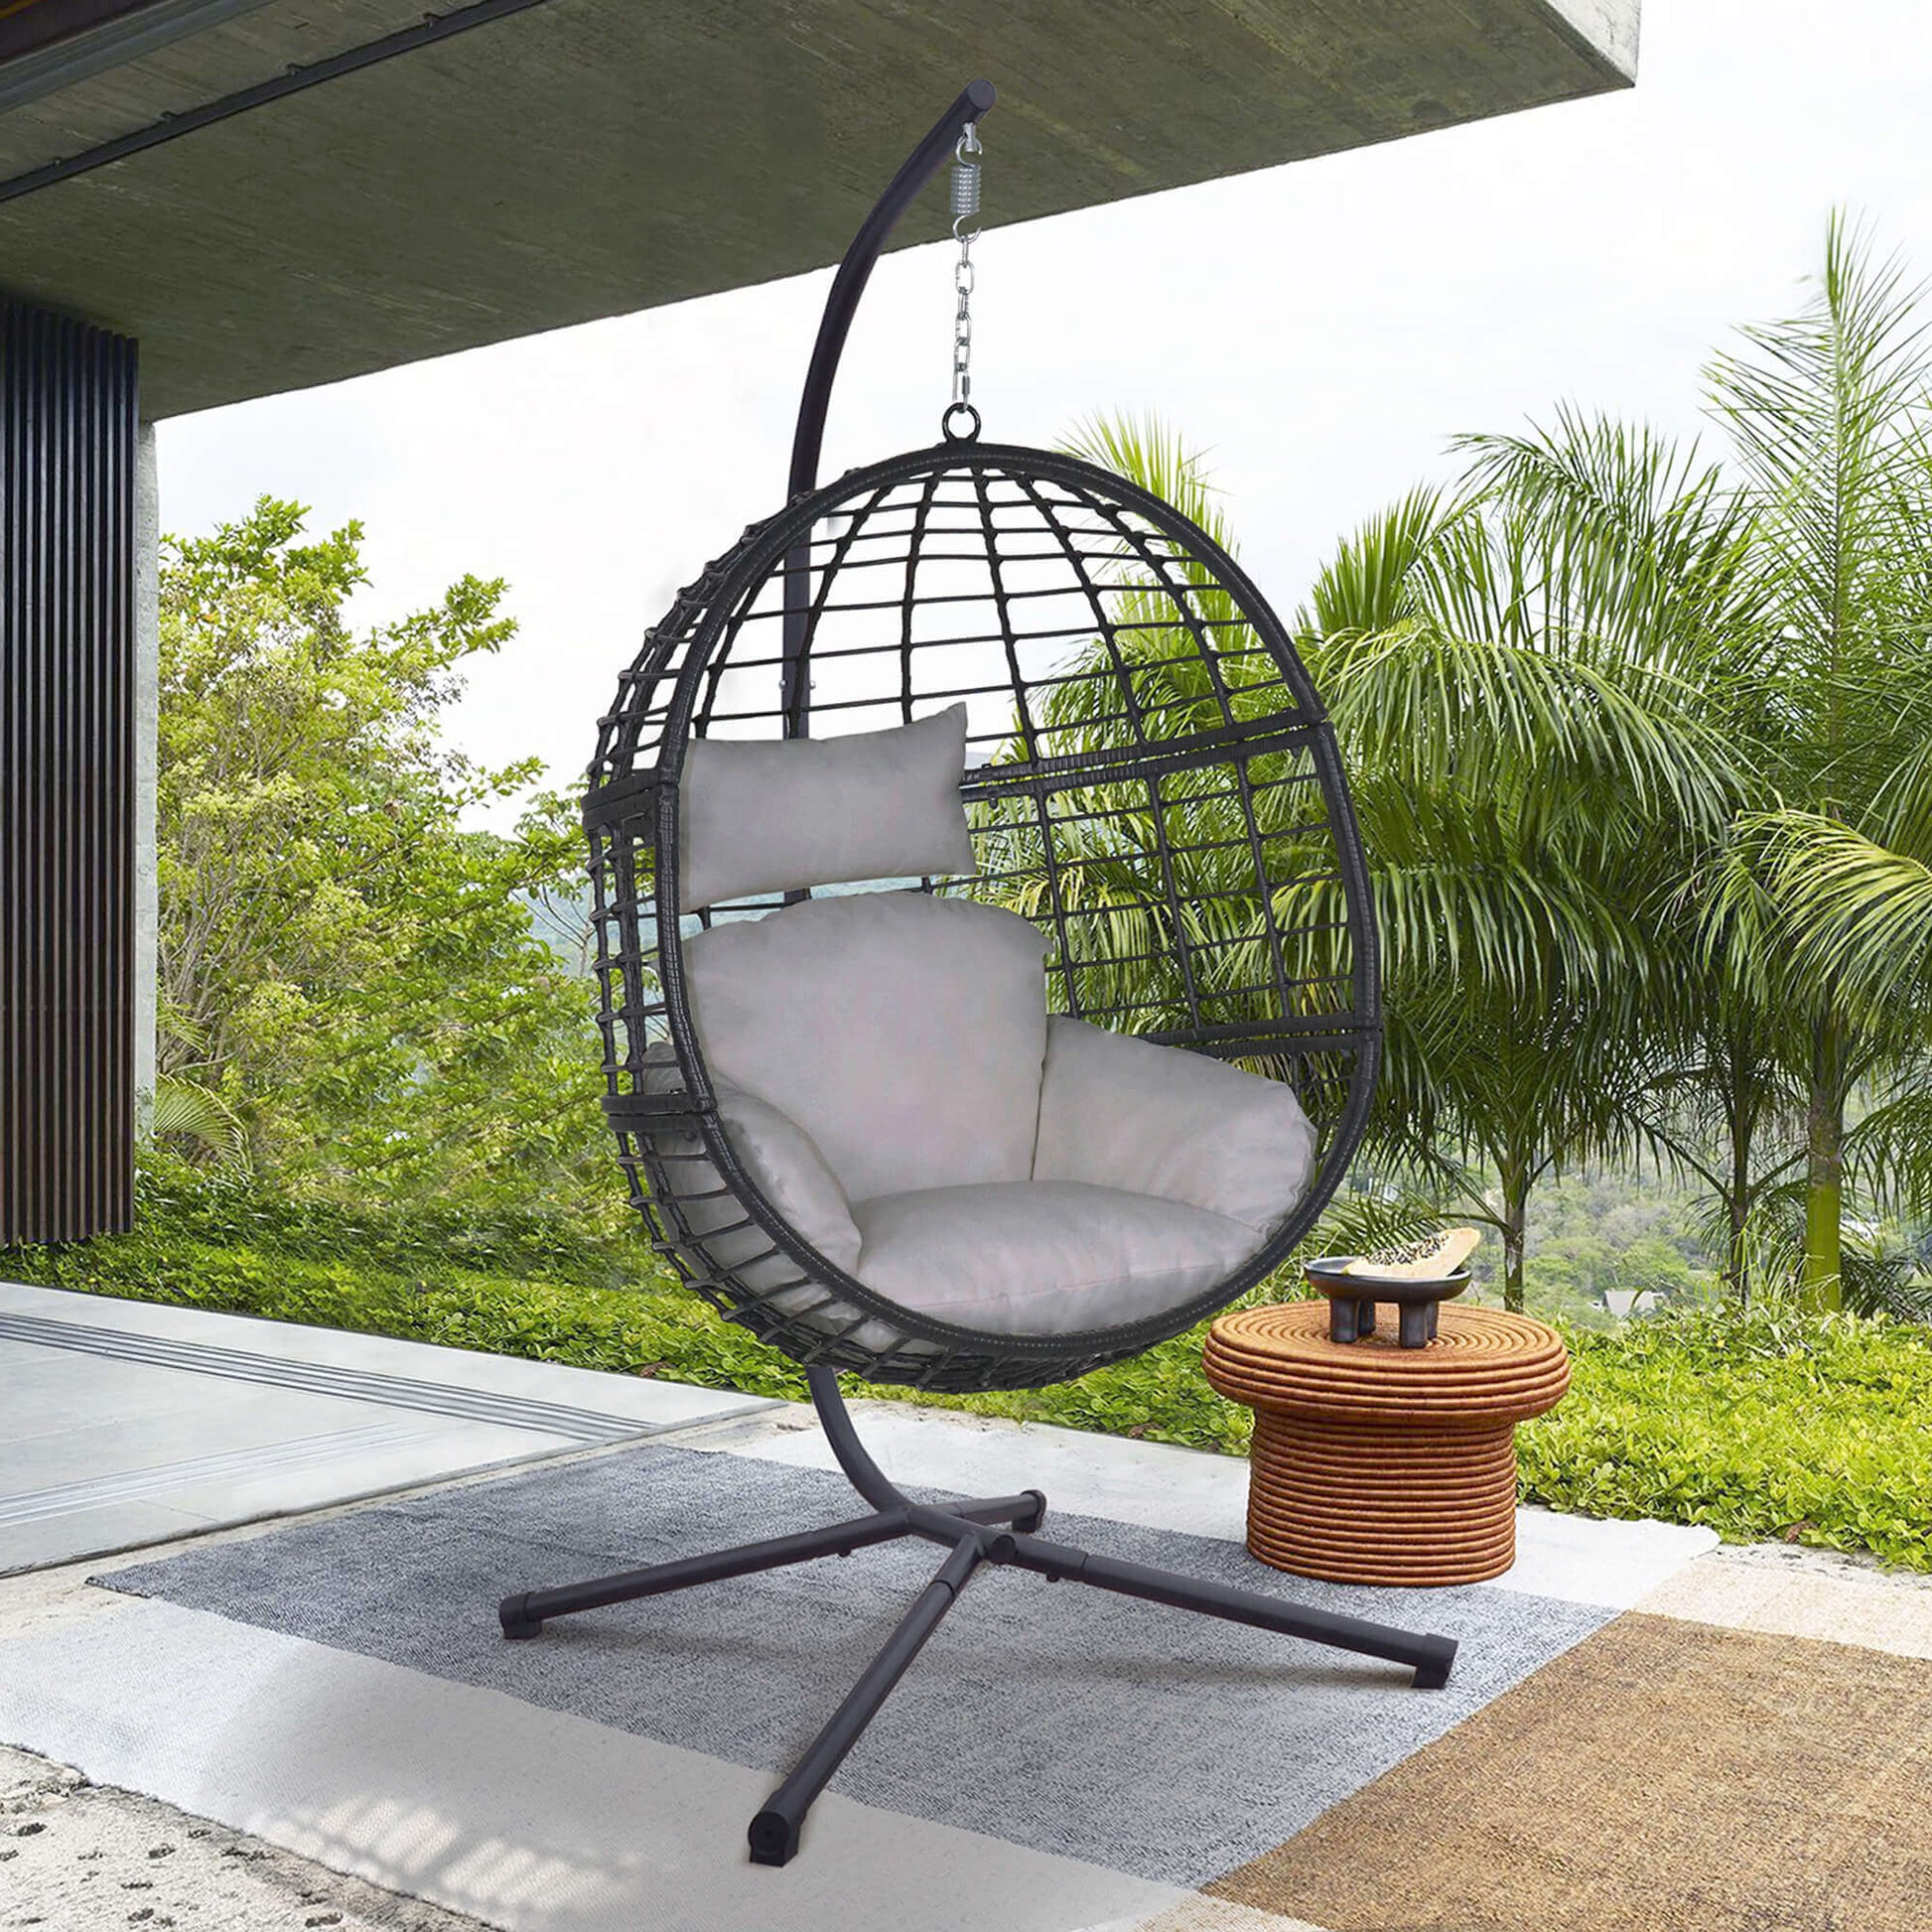 Arttoreal Indoor Outdoor Patio Wicker Hanging Chair Swing Hammock Egg Chairs UV Resistant Cushions with Aluminum Frame for Patio Bedroom Balcony